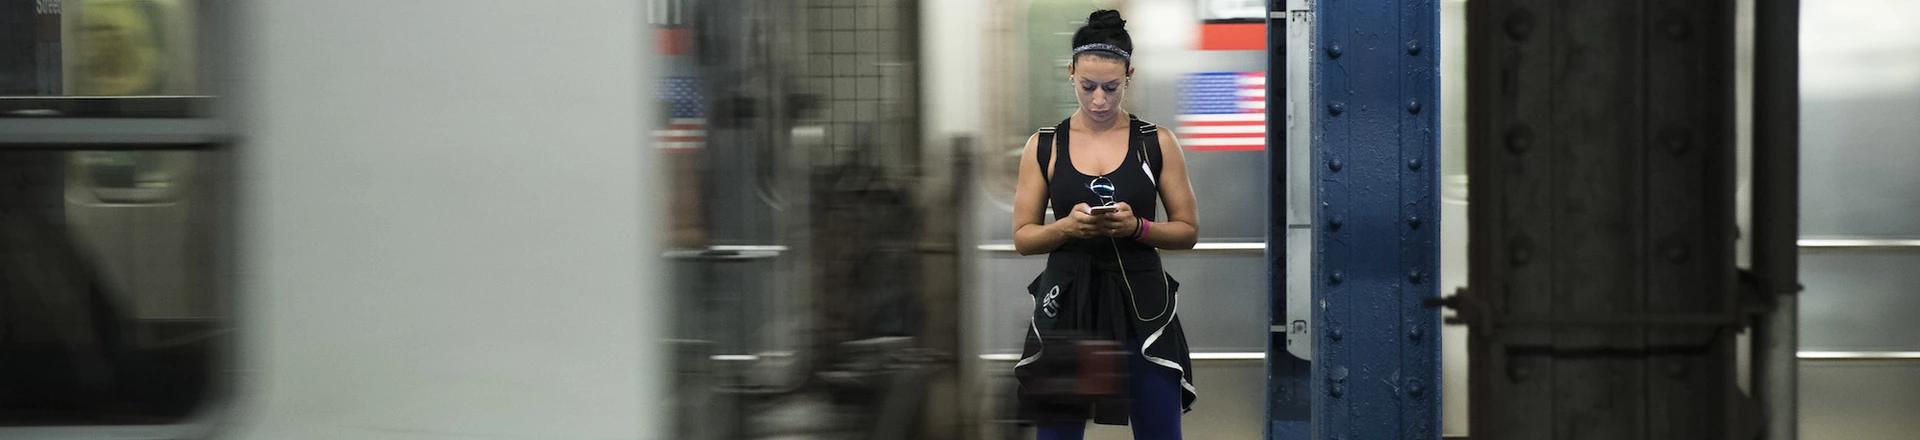 NEW YORK, NY - JULY 20: A woman looks at her smartphone as a train passes by at the 14th Street subway station, July 20, 2016 in New York City. The Metropolitan Transportation Authority (MTA) has placed digital signage in subway stations encouraging riders to be safe while playing the Pokemon Go app on their smartphones. (Photo by Drew Angerer/Getty Images)